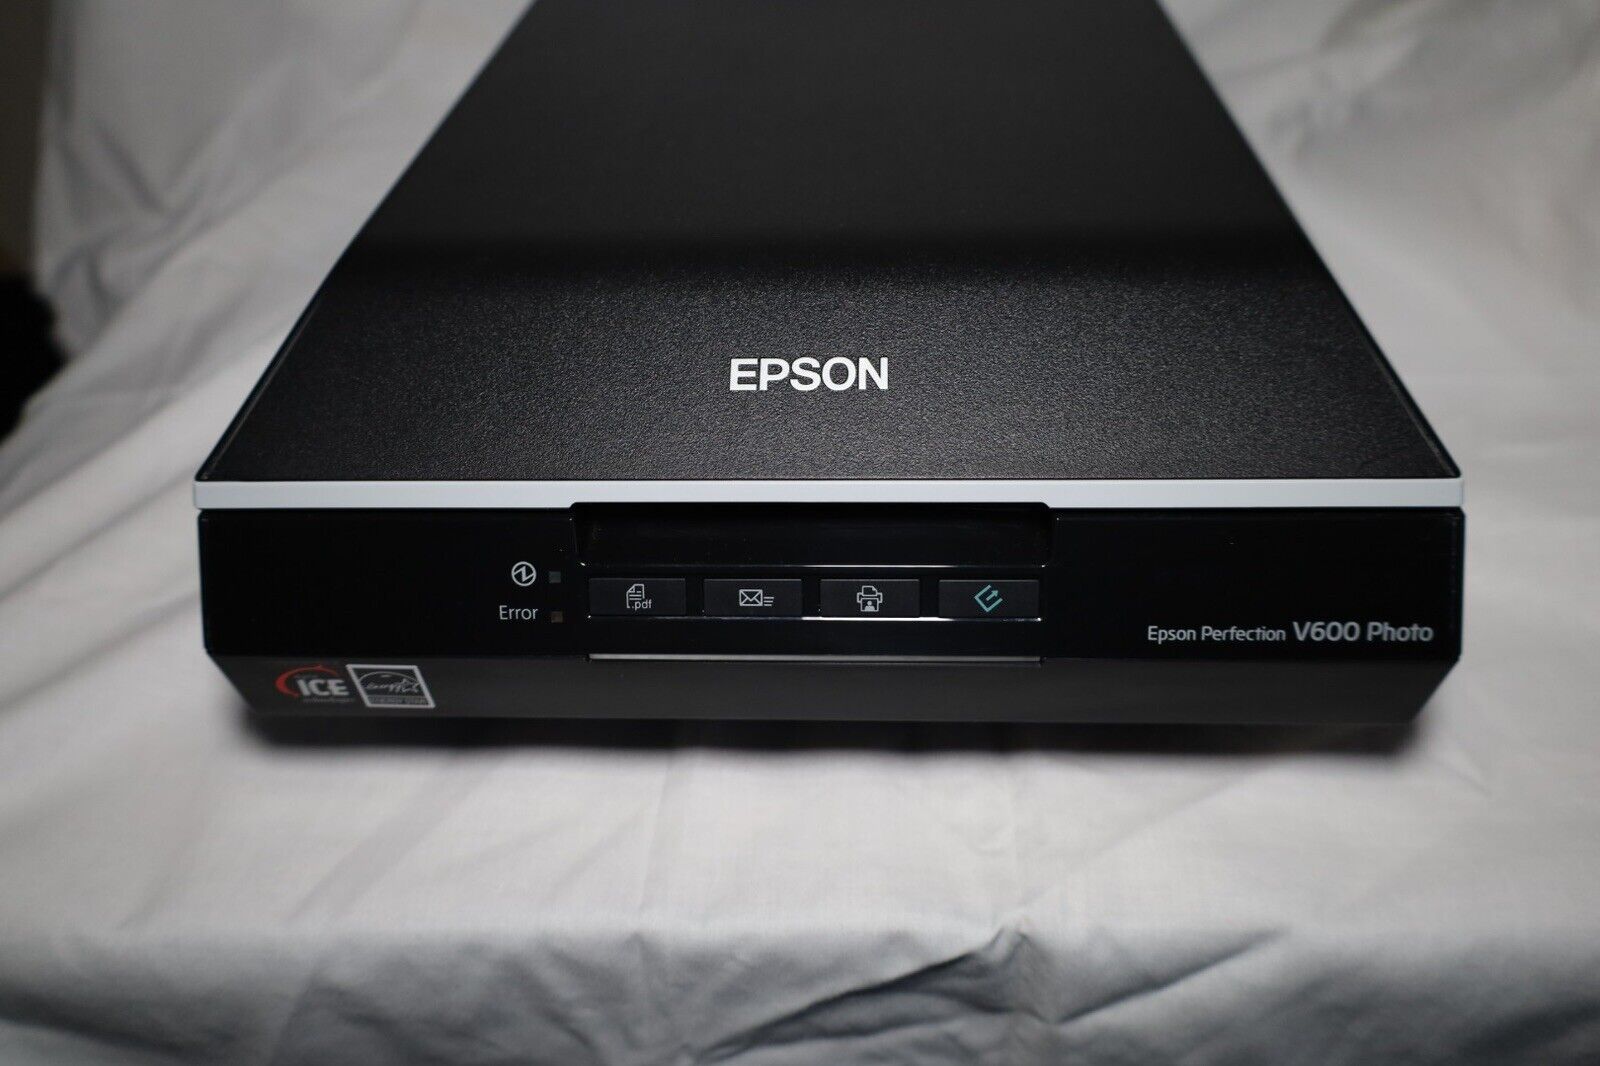 Epson Perfection V600 Photo Scanner w/Cord Black Tested Model #J252A